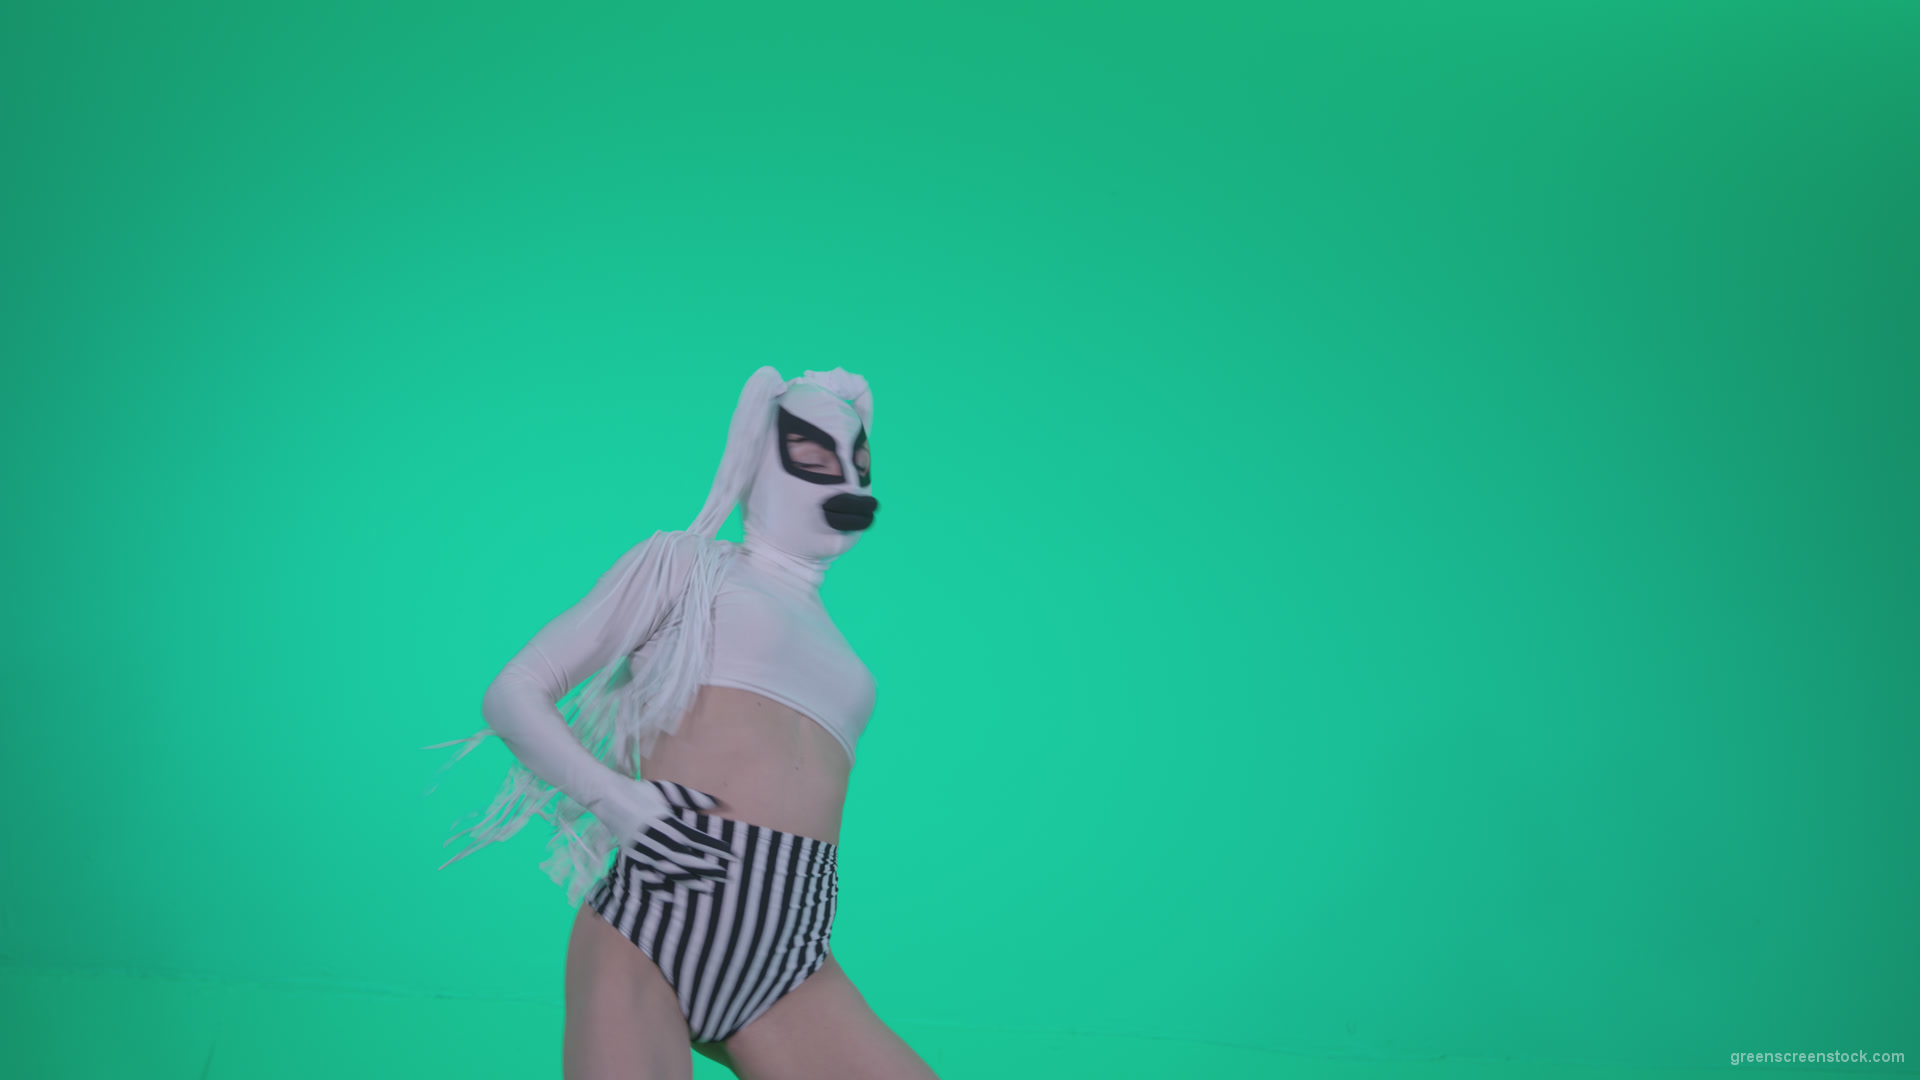 Go-go-Dancer-with-Latex-Top-t9-Green-Screen-Video-Footage_008 Green Screen Stock